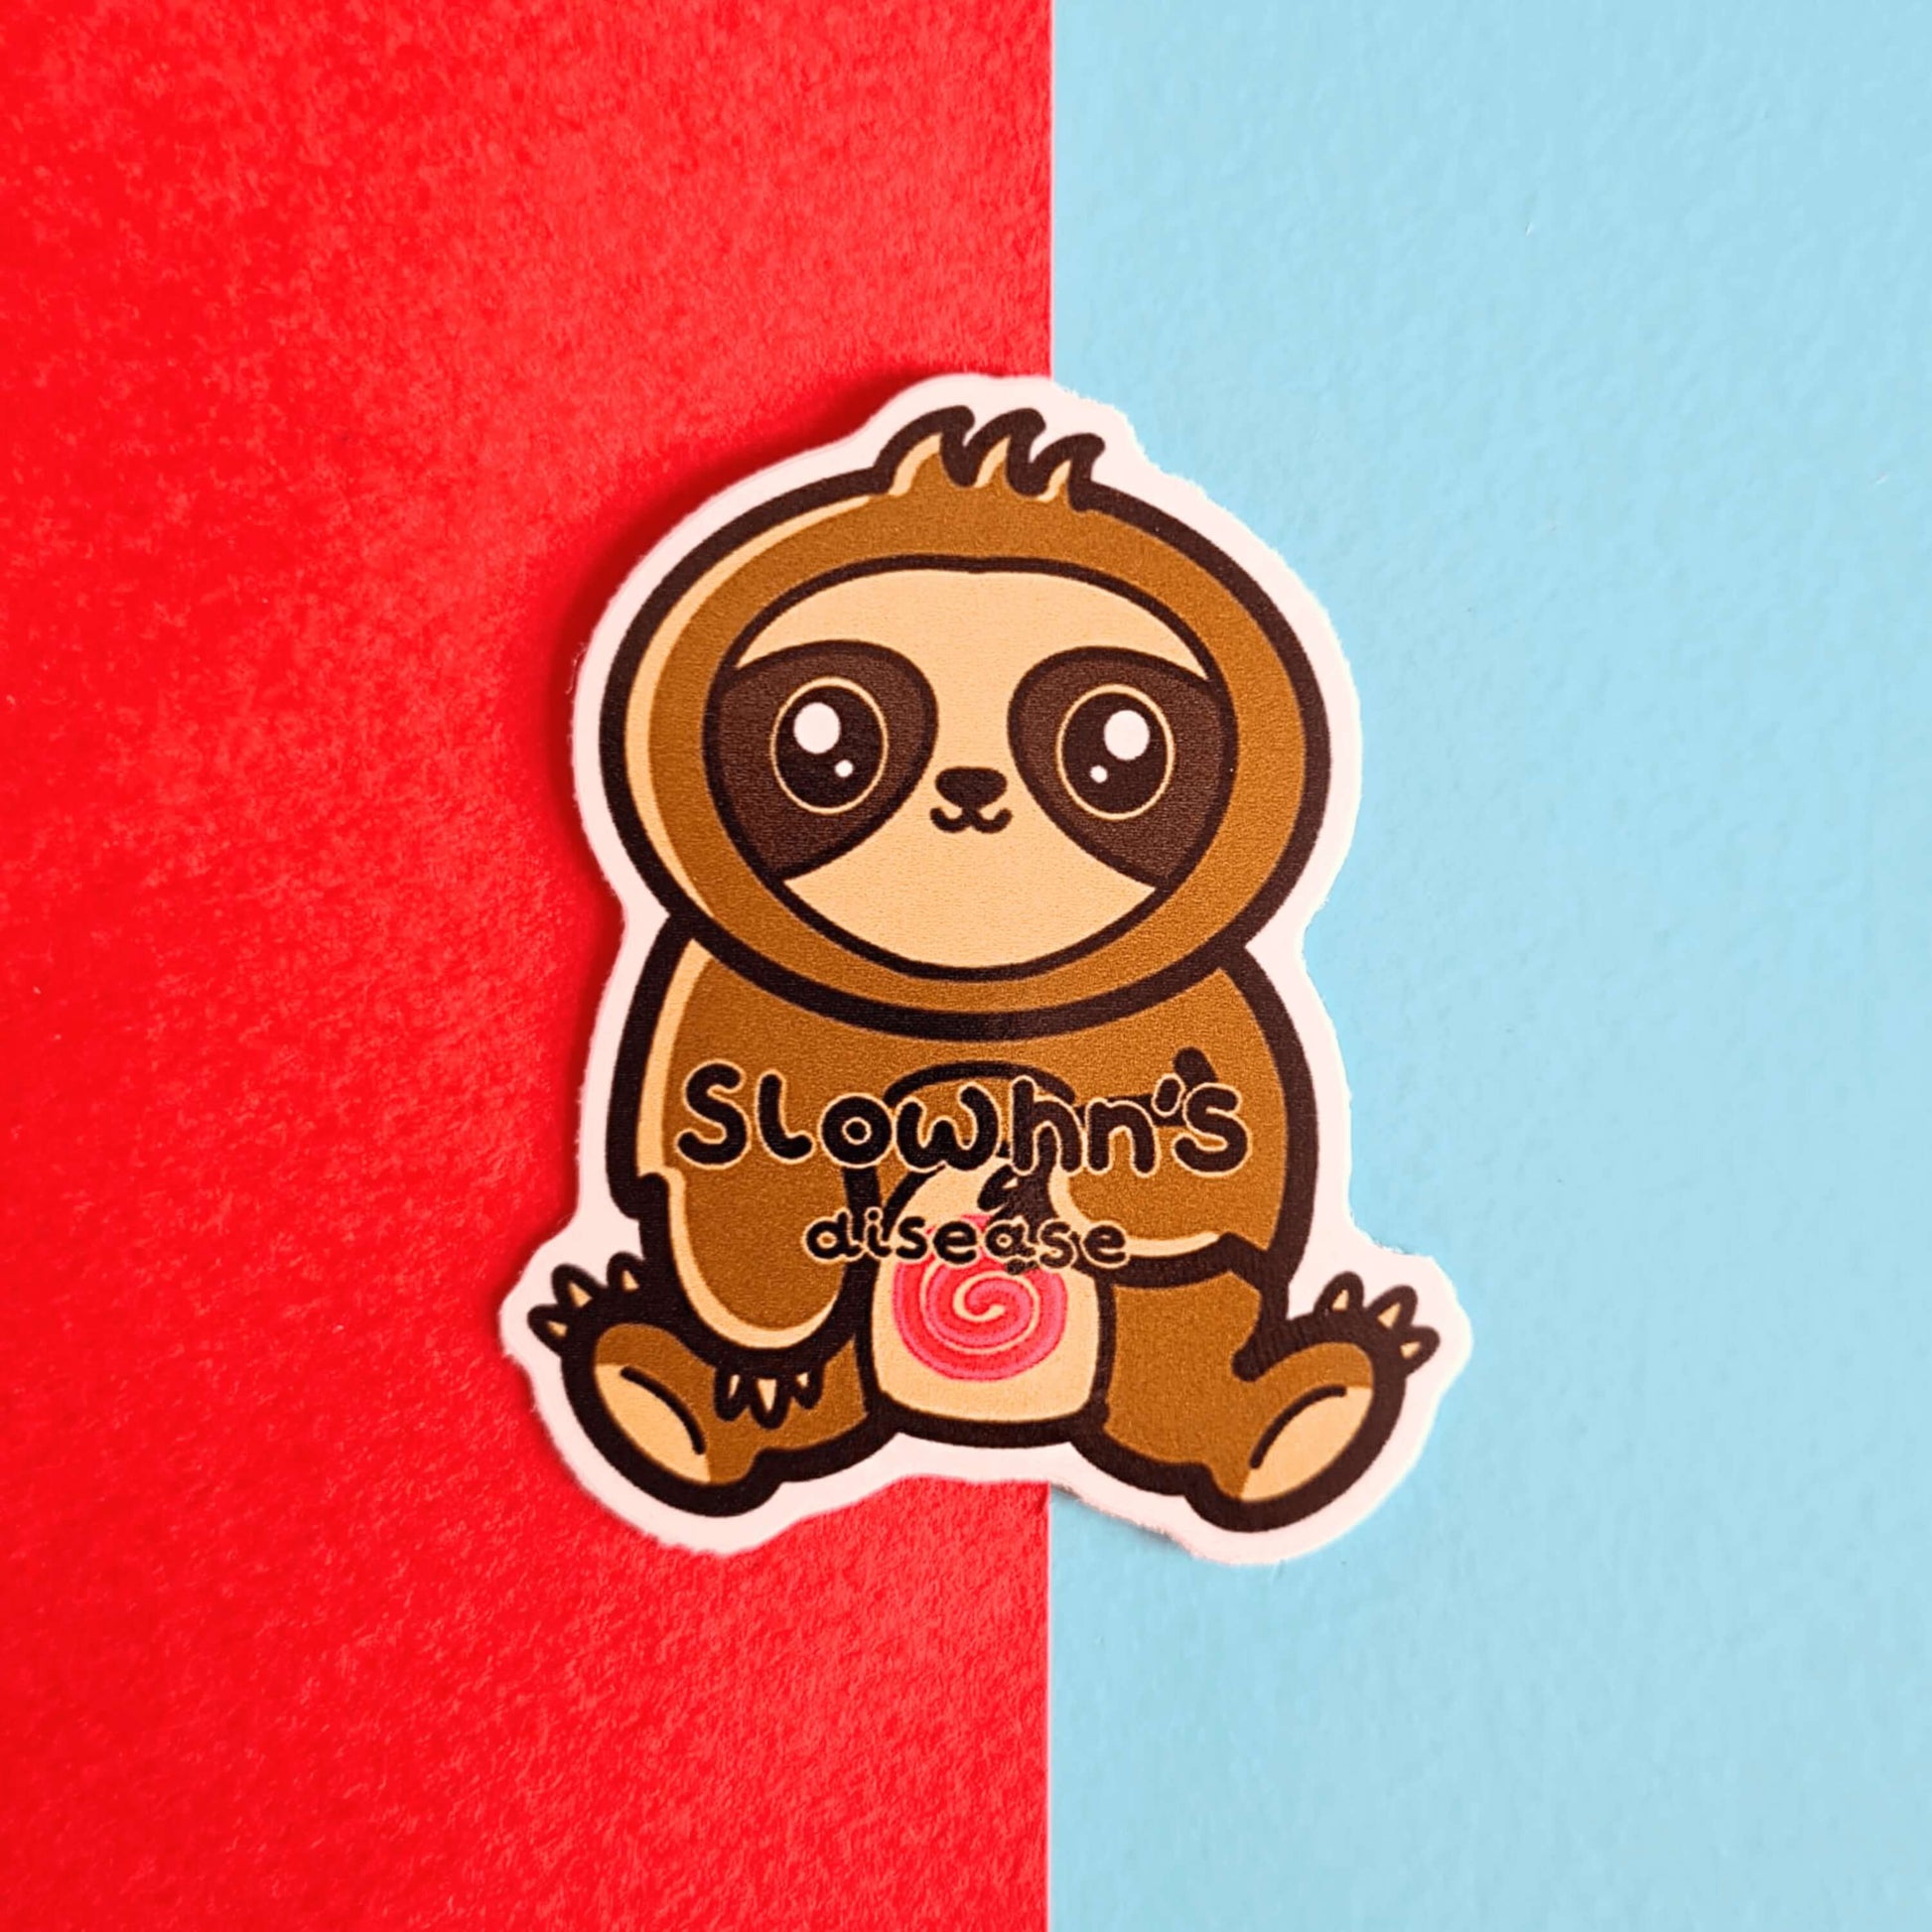 The Slowhn's Disease Sloth Sticker - Crohn's Disease on a blue and red background. The sloth shape sticker is smiling sat down clutching its tummy that has a red swirl and text reading 'slowhn's disease'. The design is raising awareness for crohn's disease.